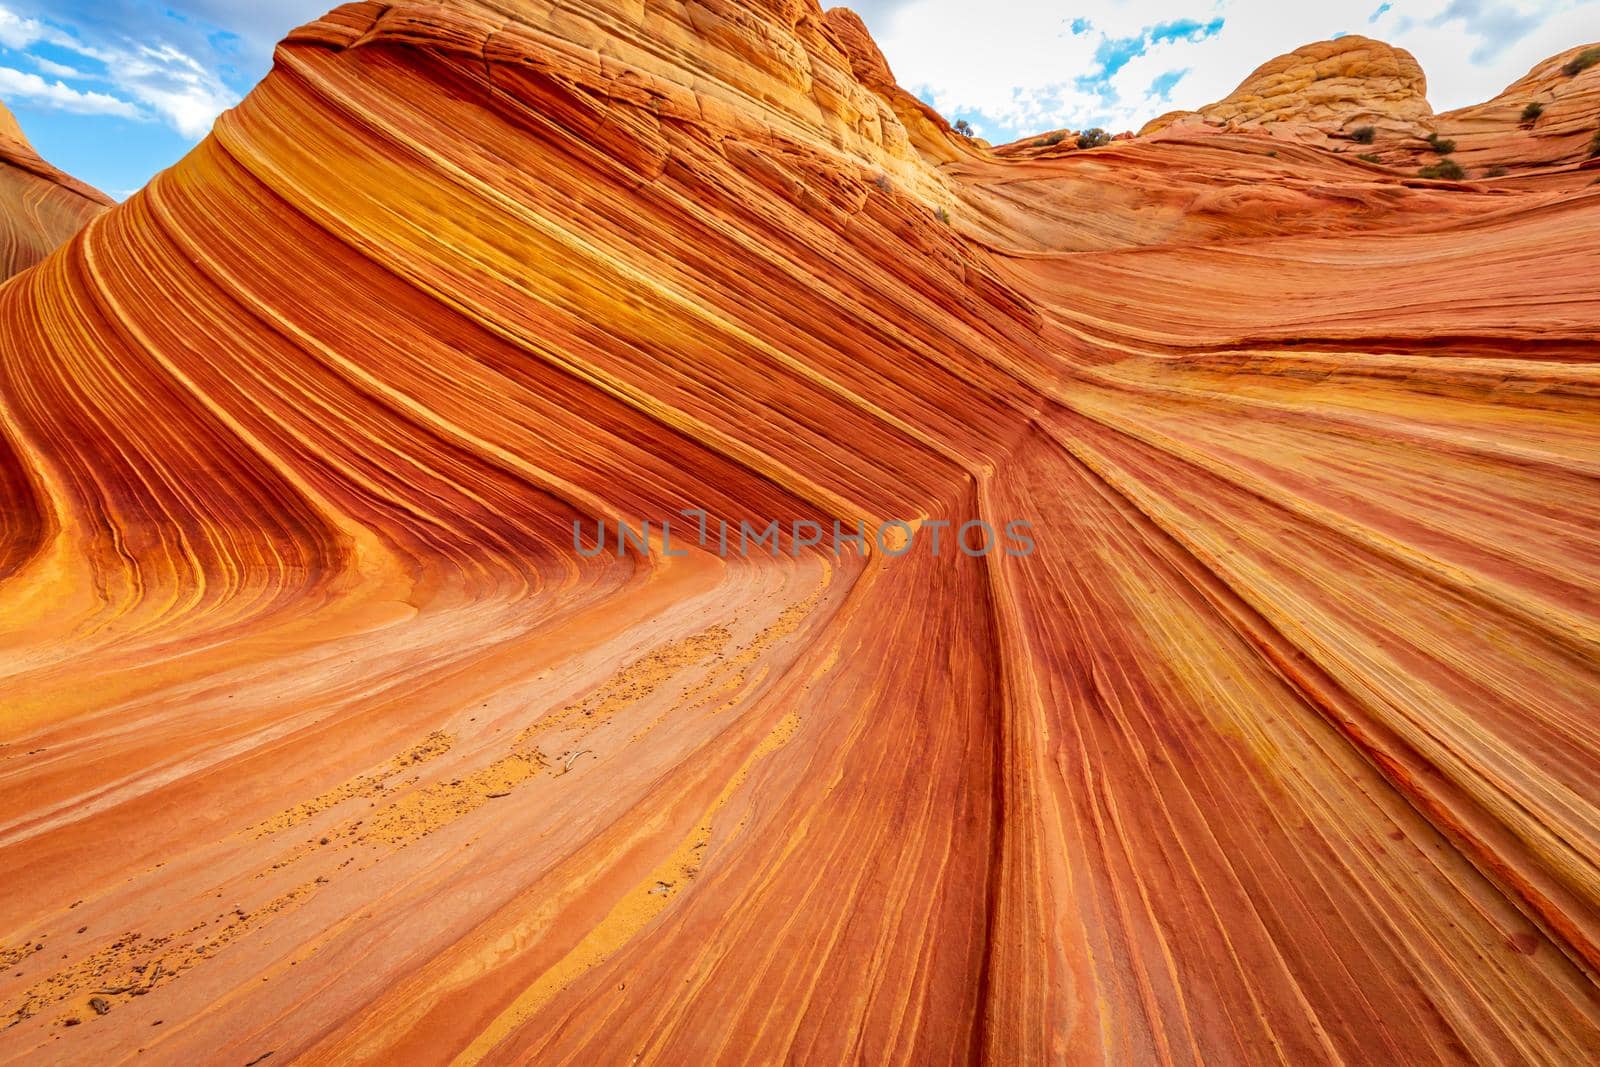 The Wave sandstone formation in Arizona by gepeng